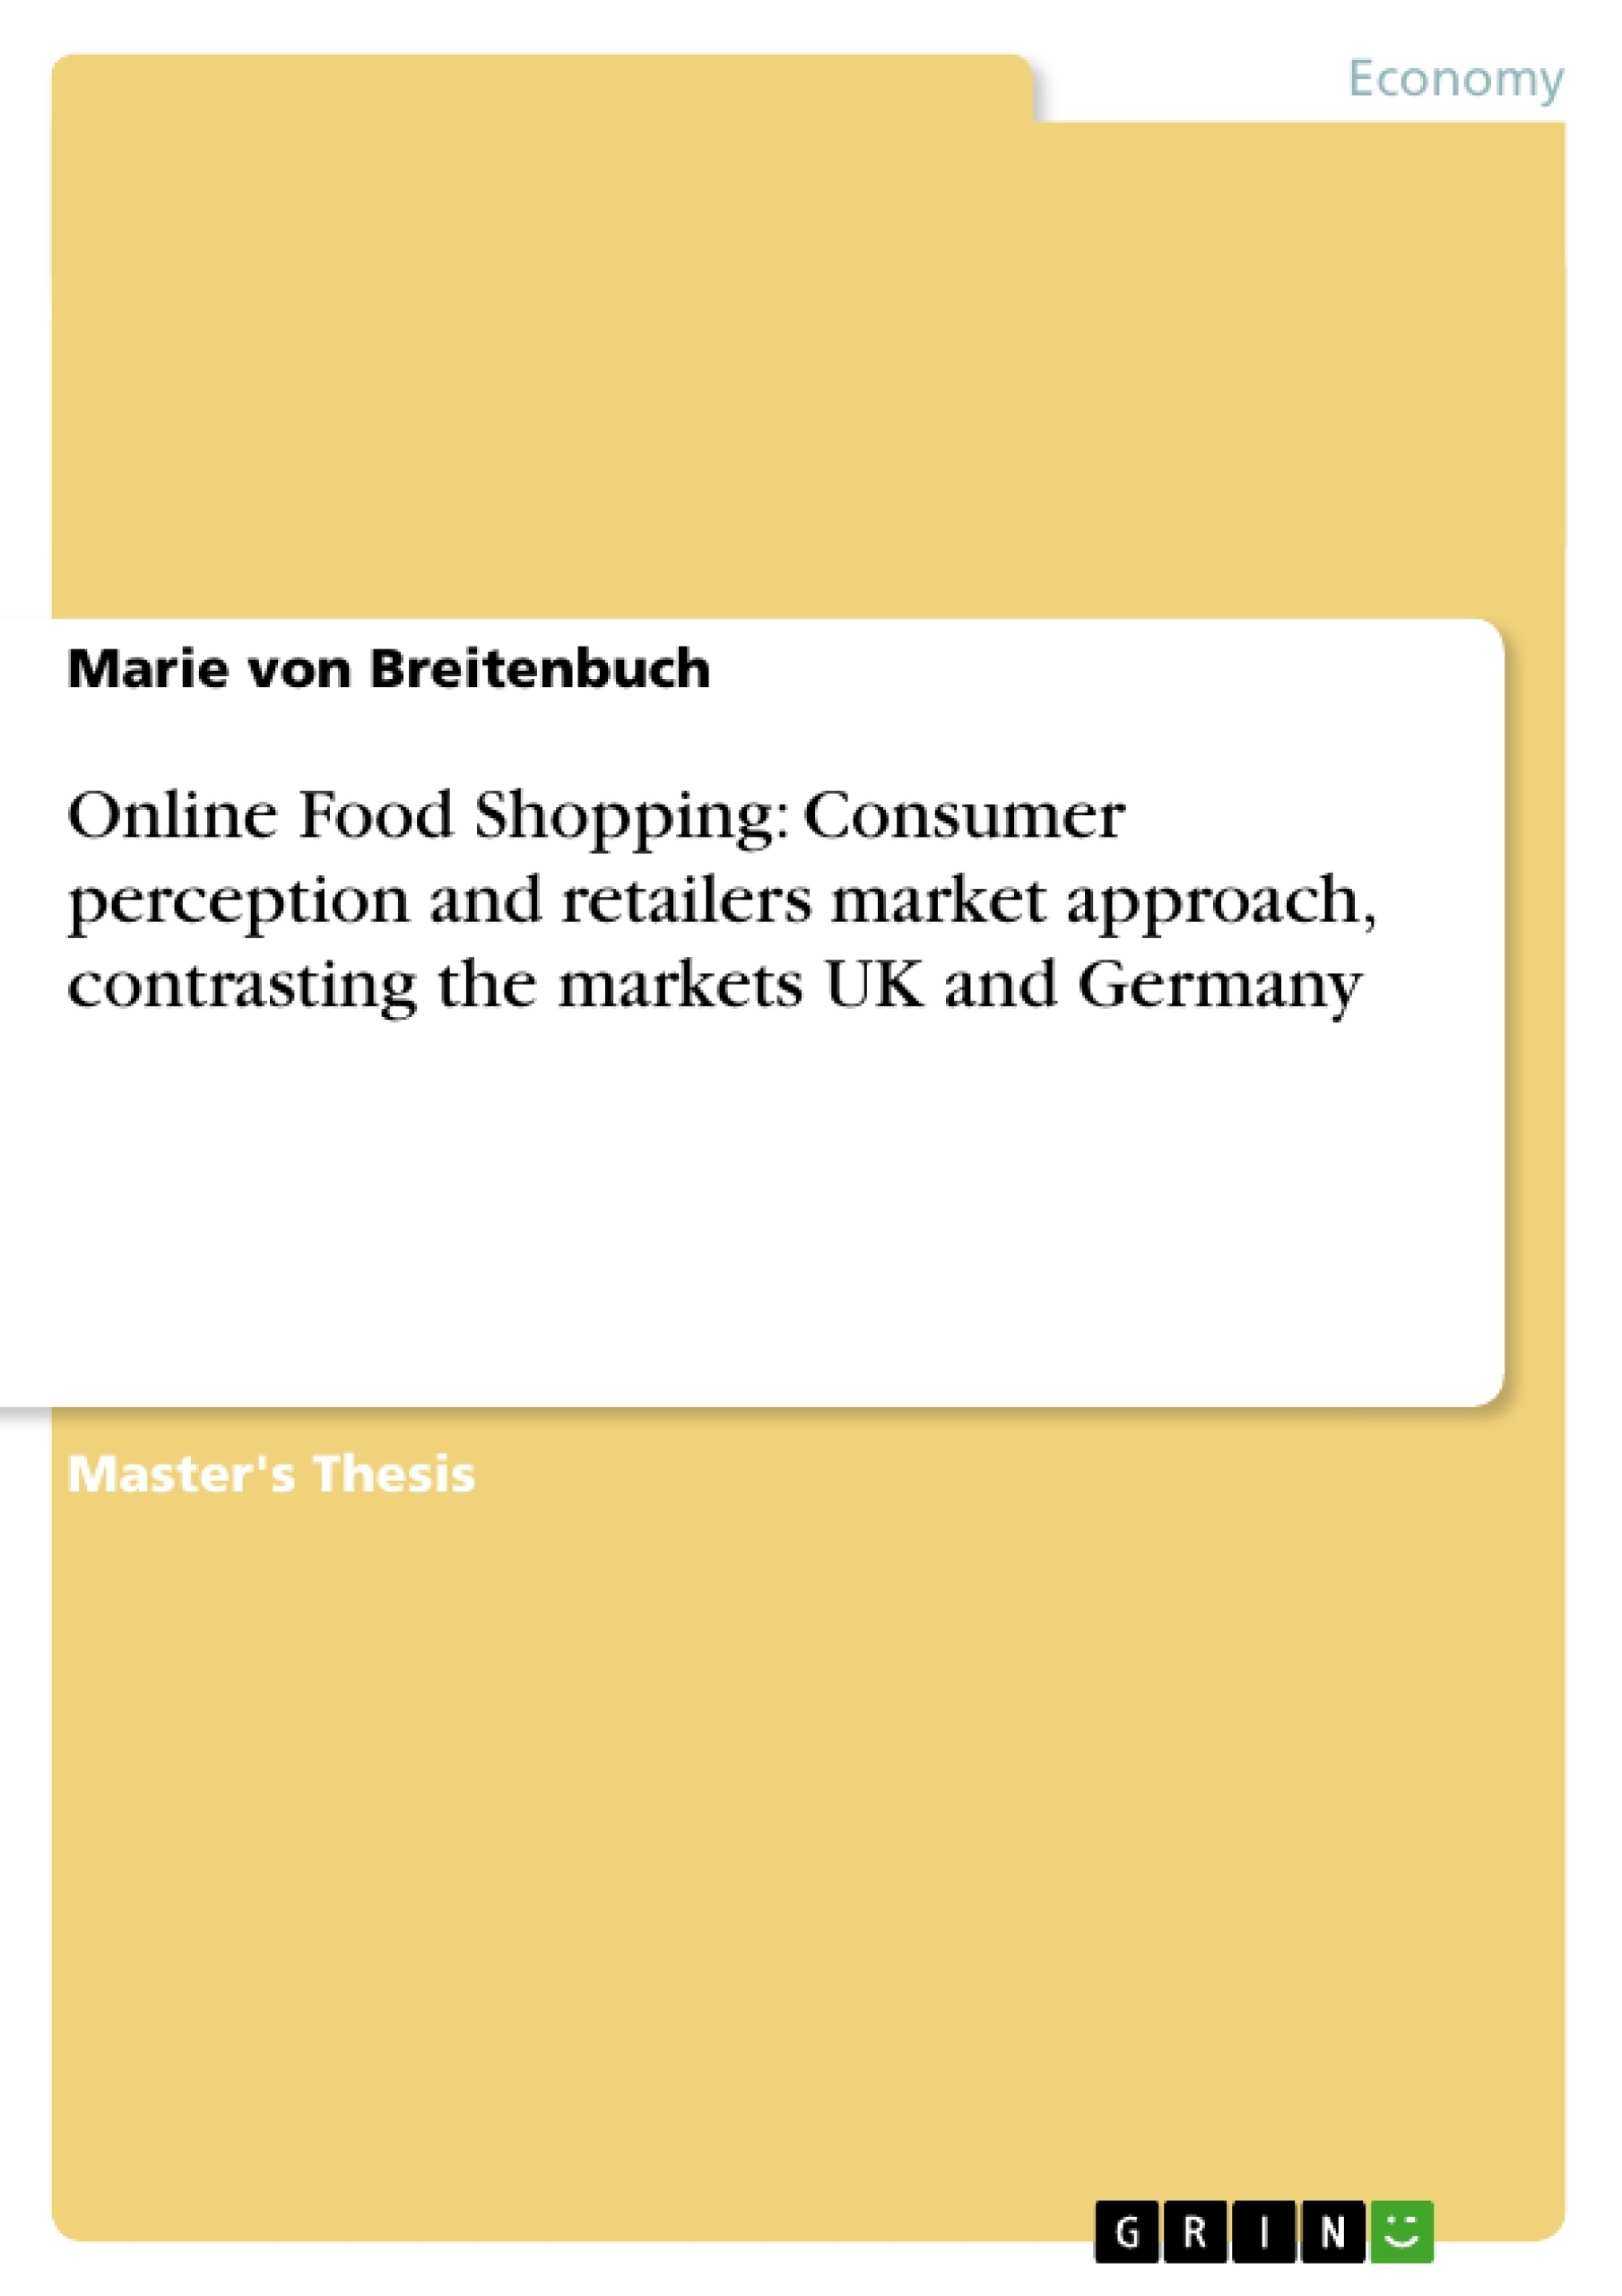 Título: Online Food Shopping: Consumer perception and retailers market approach, contrasting the markets UK and Germany